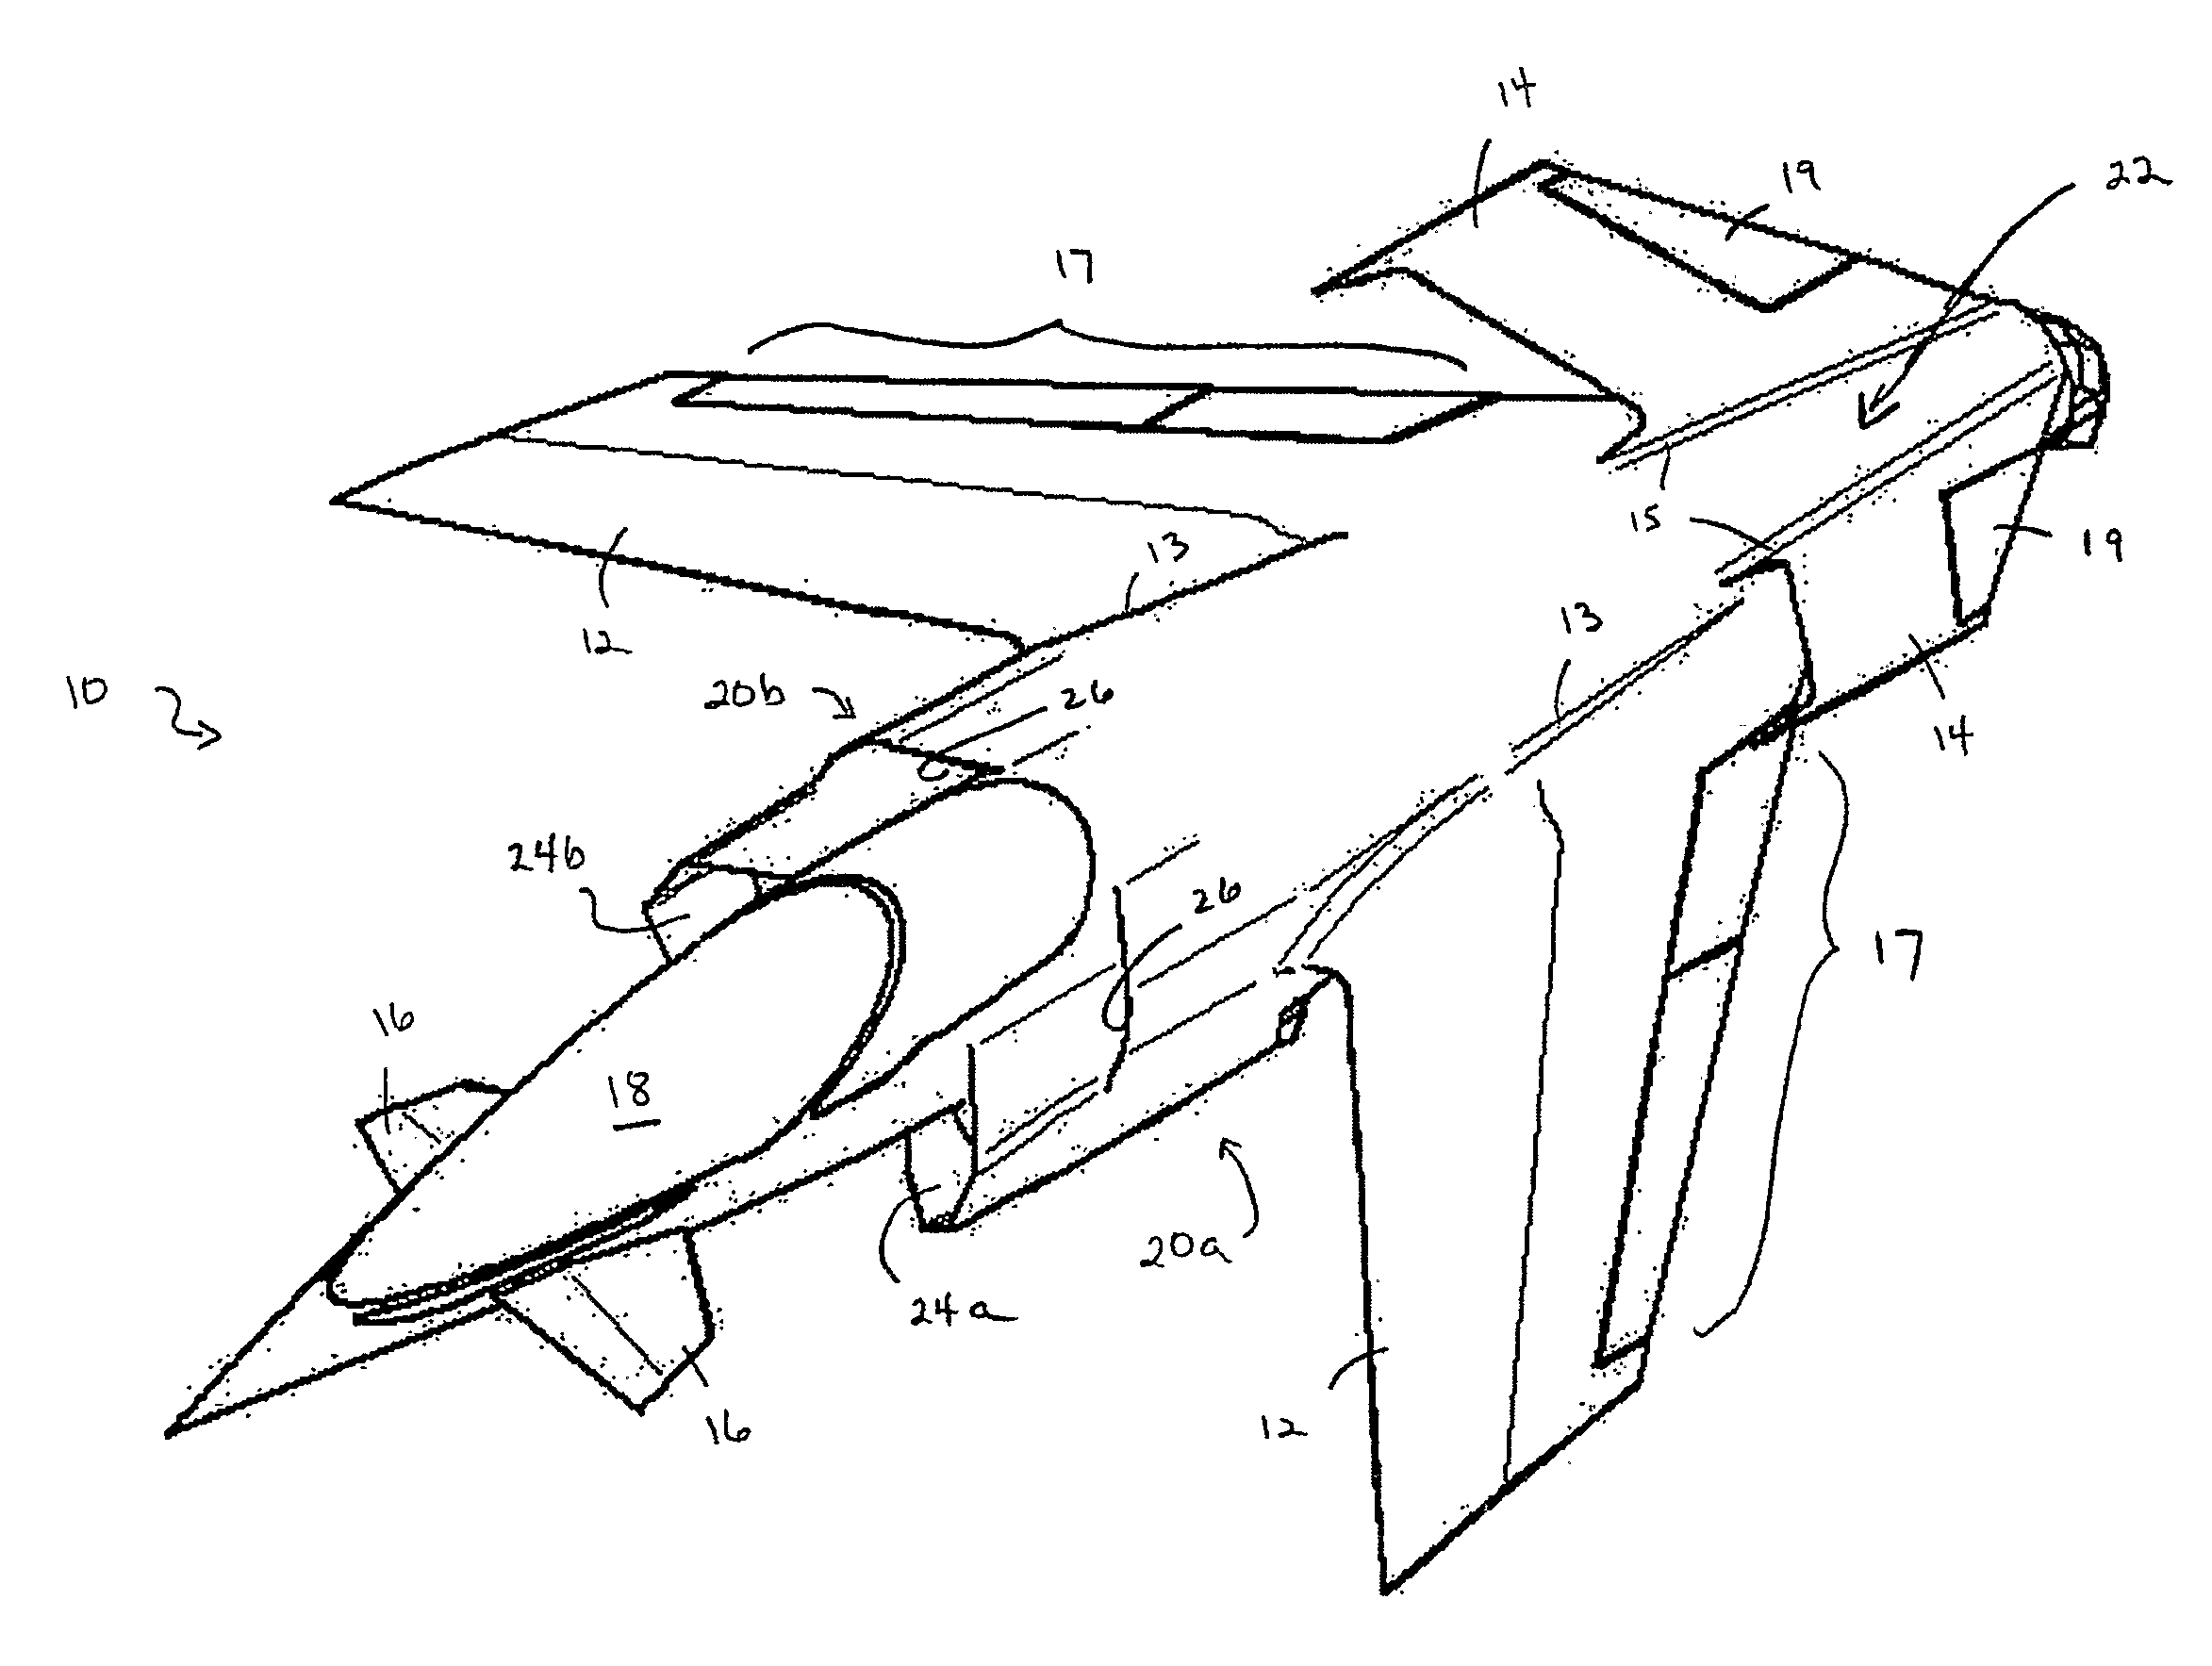 VTOL aircraft with forward-swept fixed wing